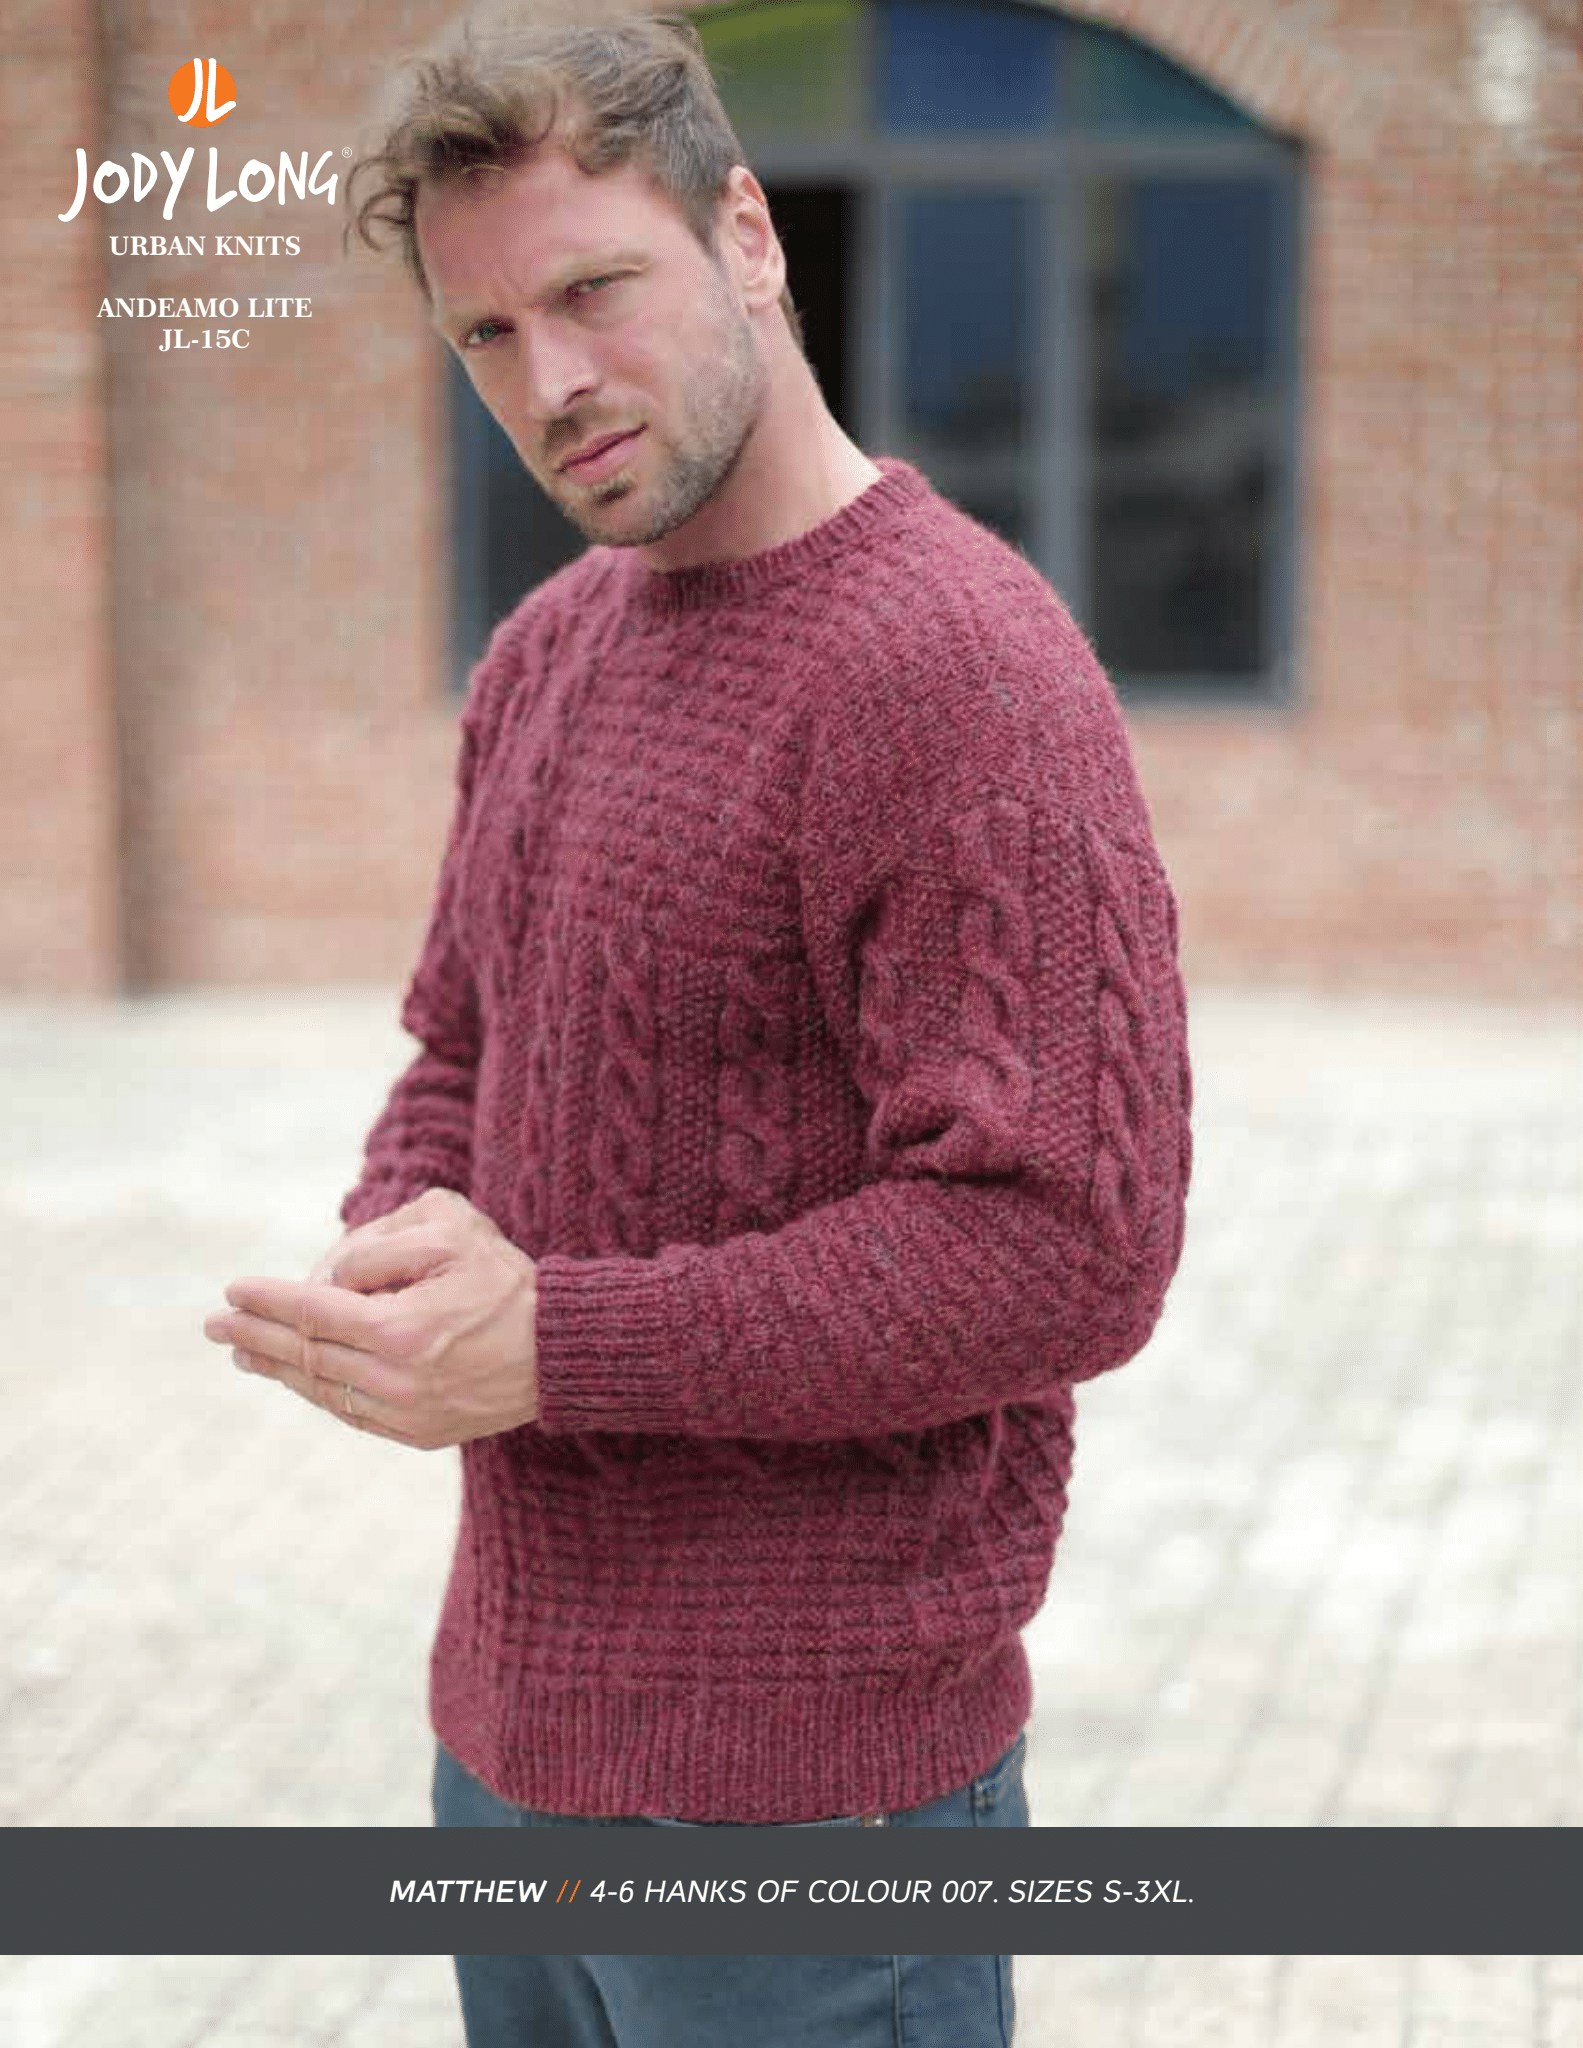 URBAN KNITS - DESIGN BOOK BY JODY LONG - AUTOGRAPHED COPY - LIMITED SUPPLIES